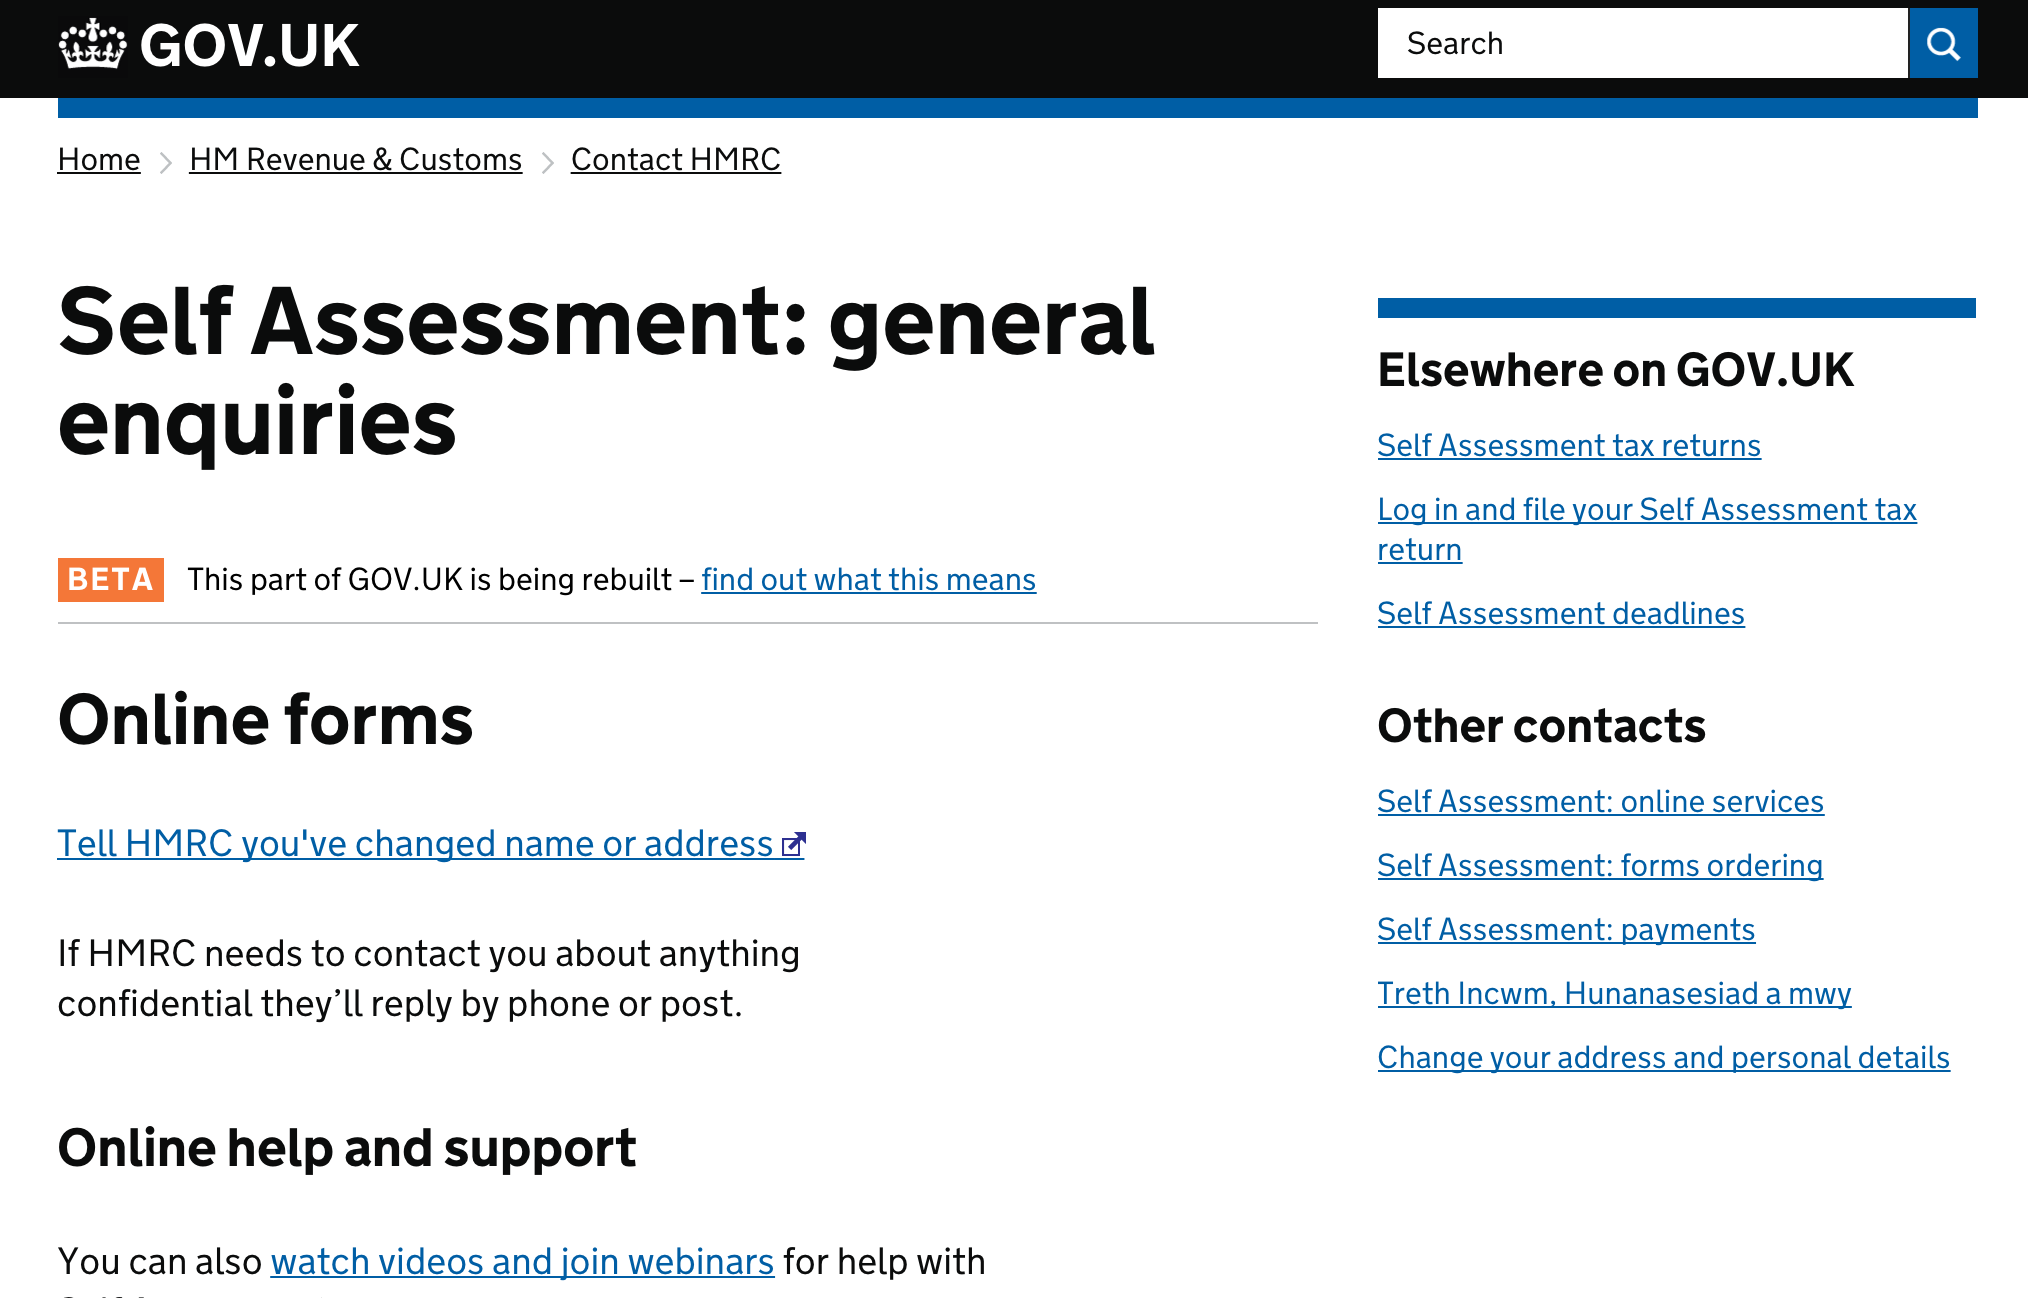 A screenshot of the Gov.UK site Self Assessment page.